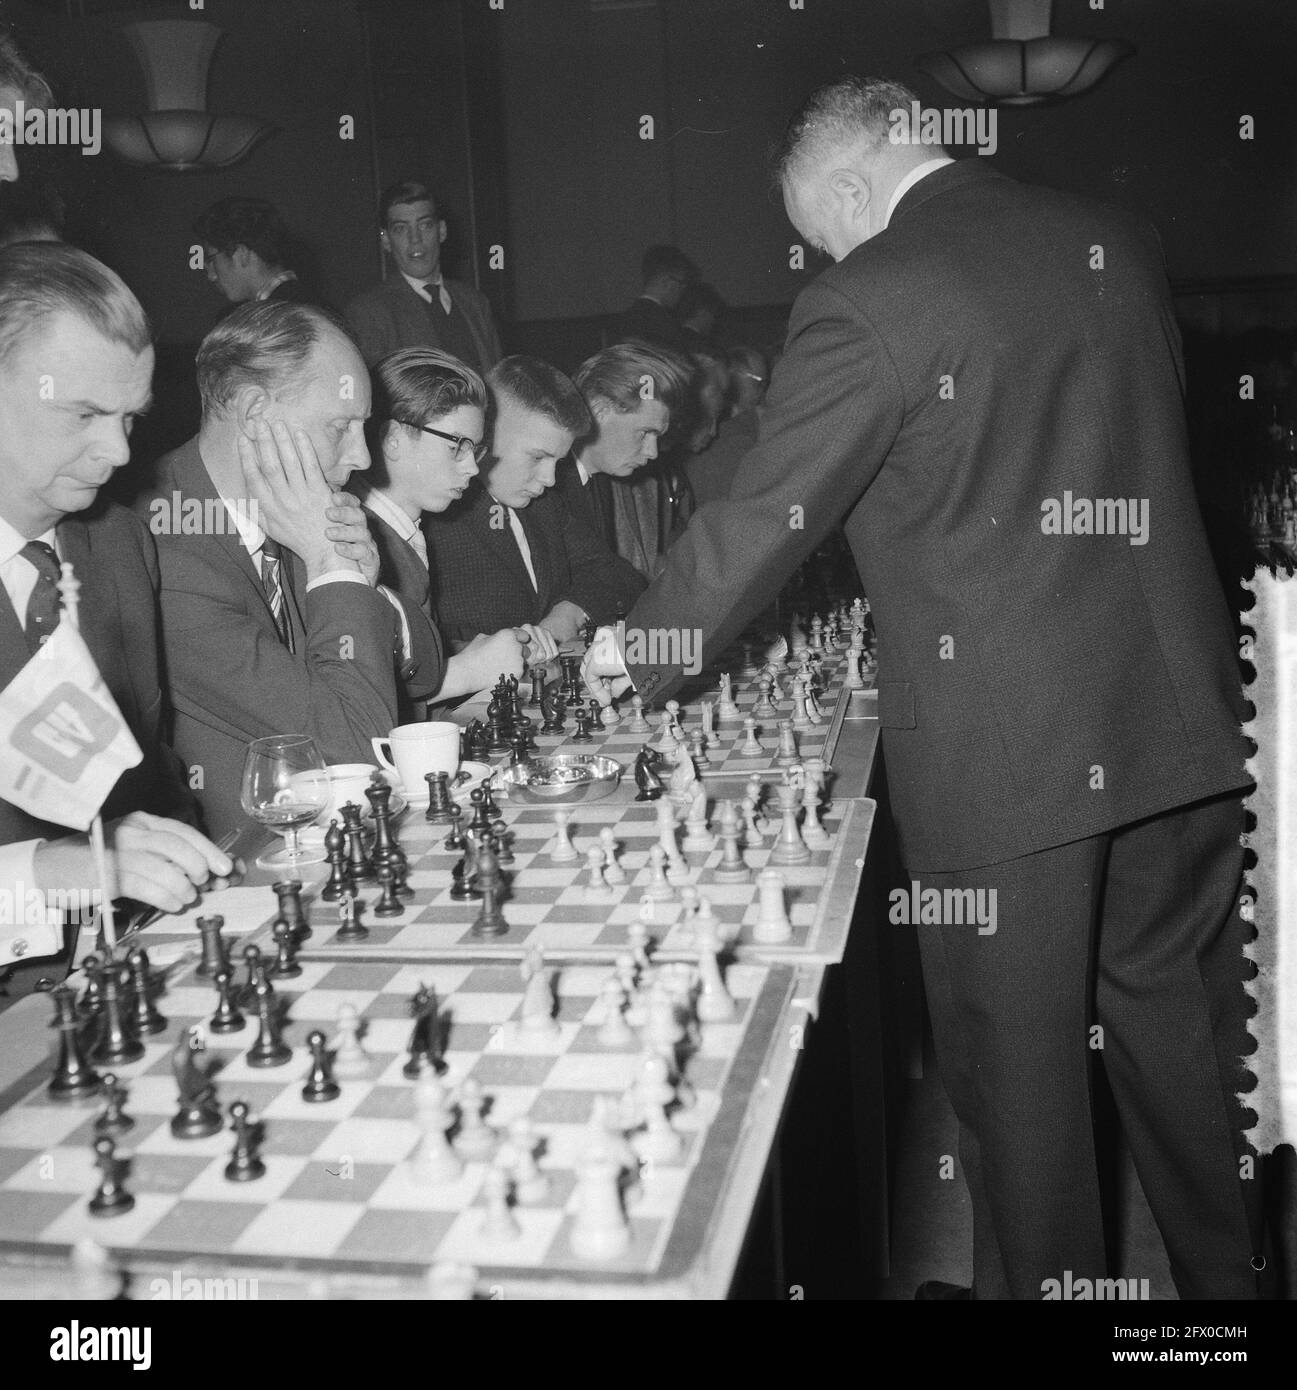 Tables Prepared for a Simultaneous Chess Games Tournament Stock Photo -  Image of items, inside: 241488312